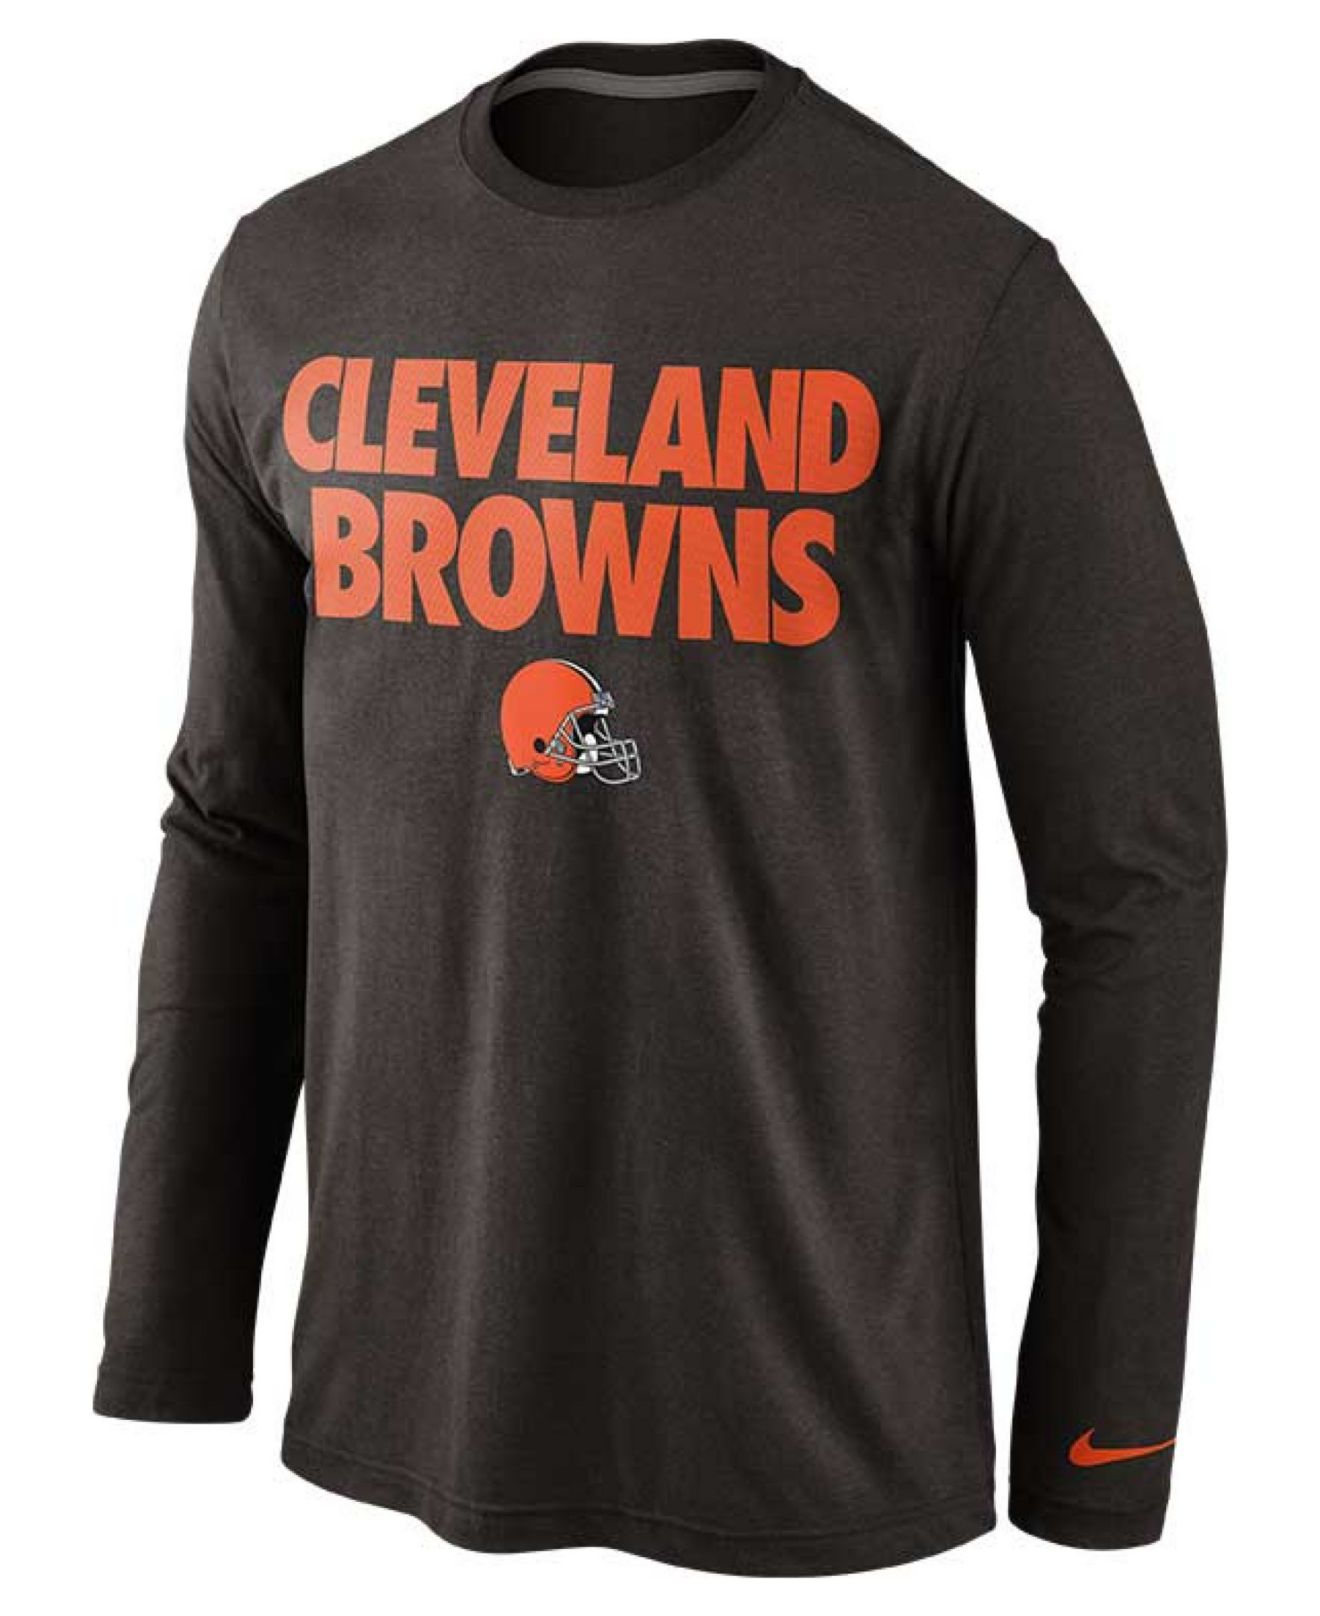 Lyst - Nike Men'S Long-Sleeve Cleveland Browns Foundation T-Shirt in ...